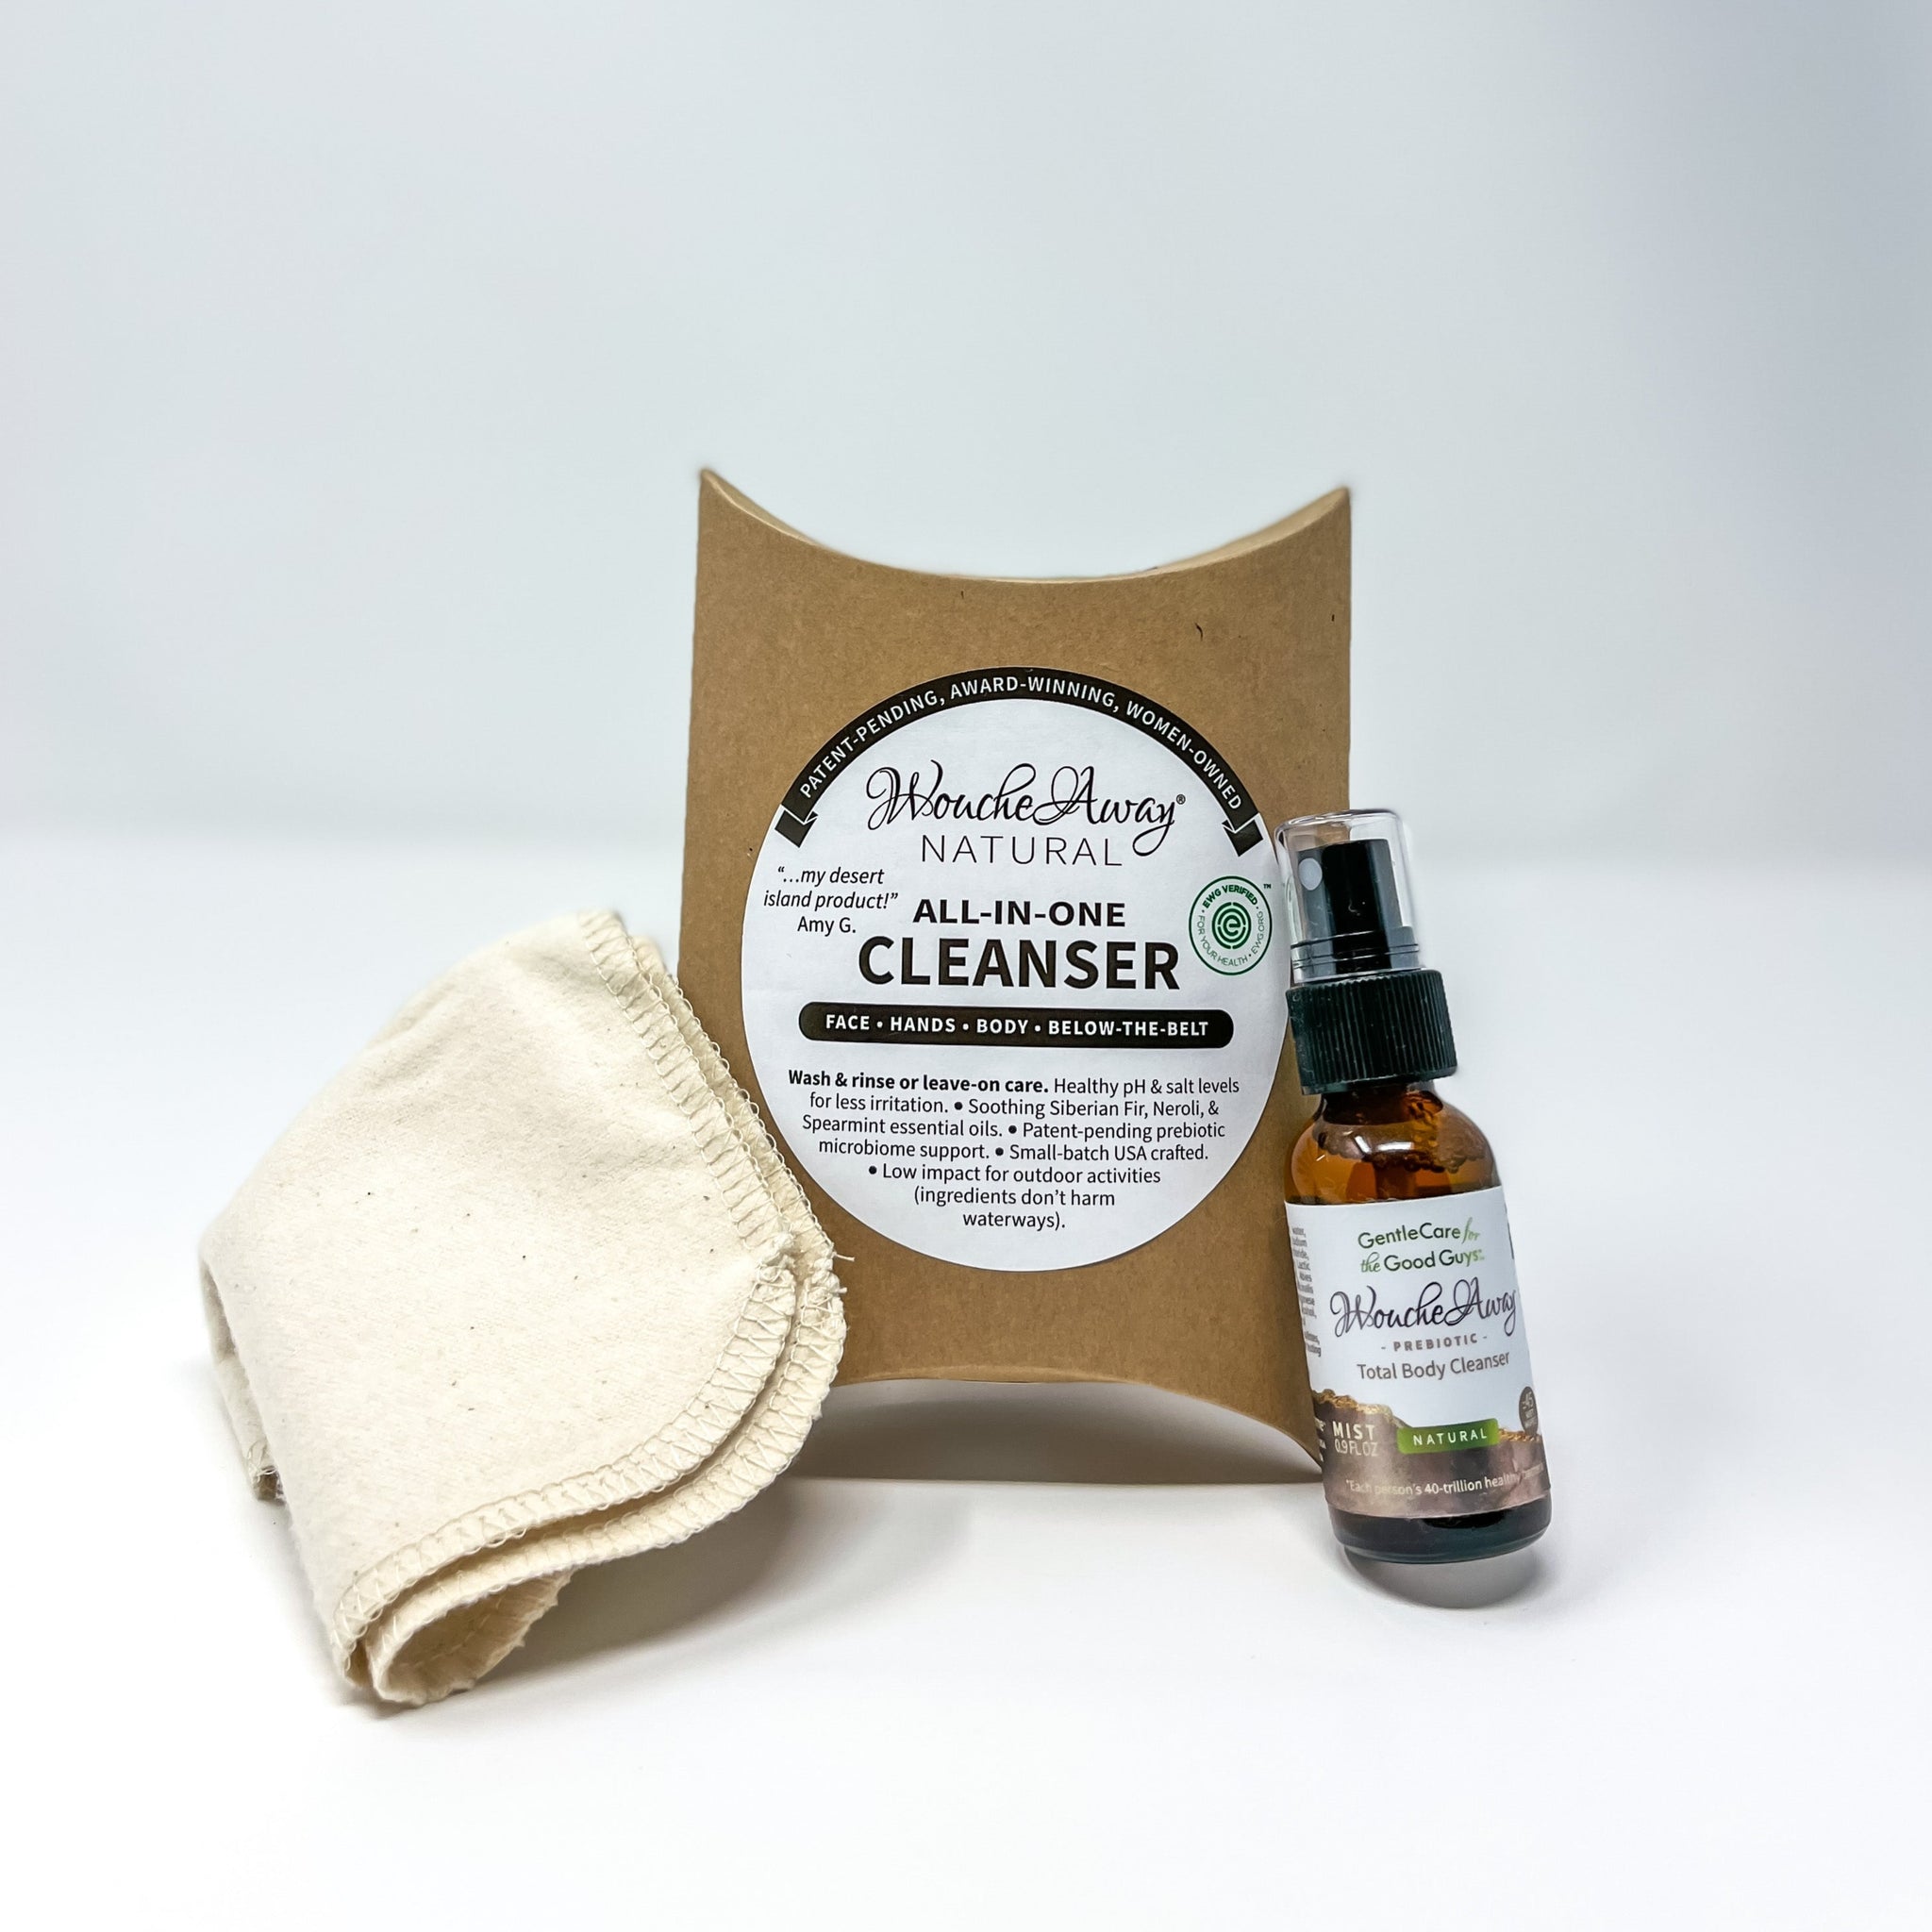 Wouche Away All-in-One Cleanser Starter Sample